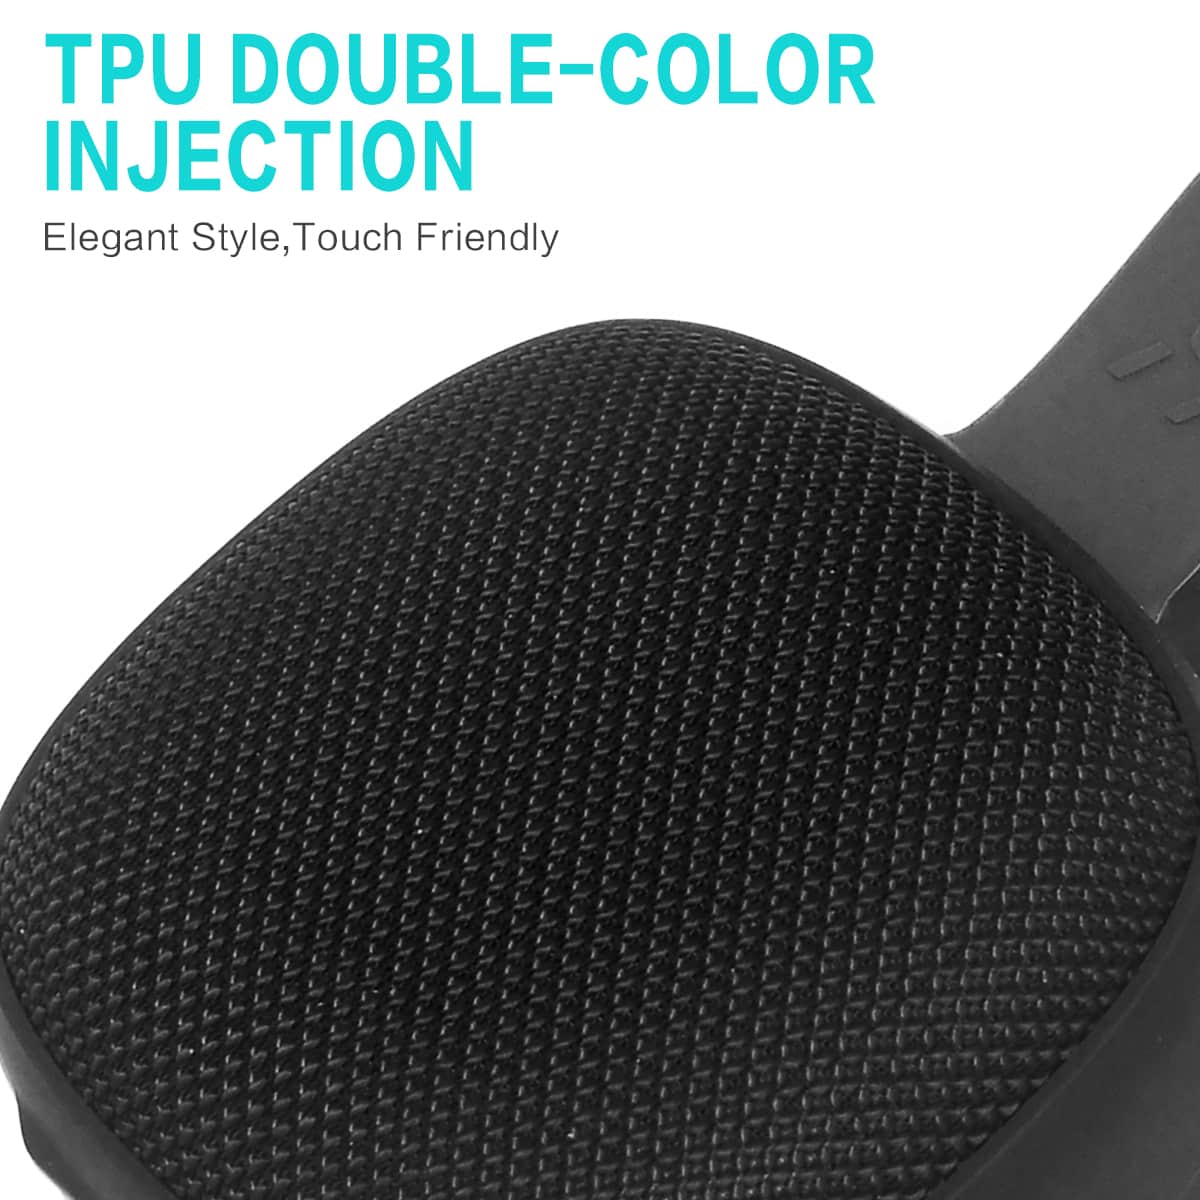 tpu double-color injection